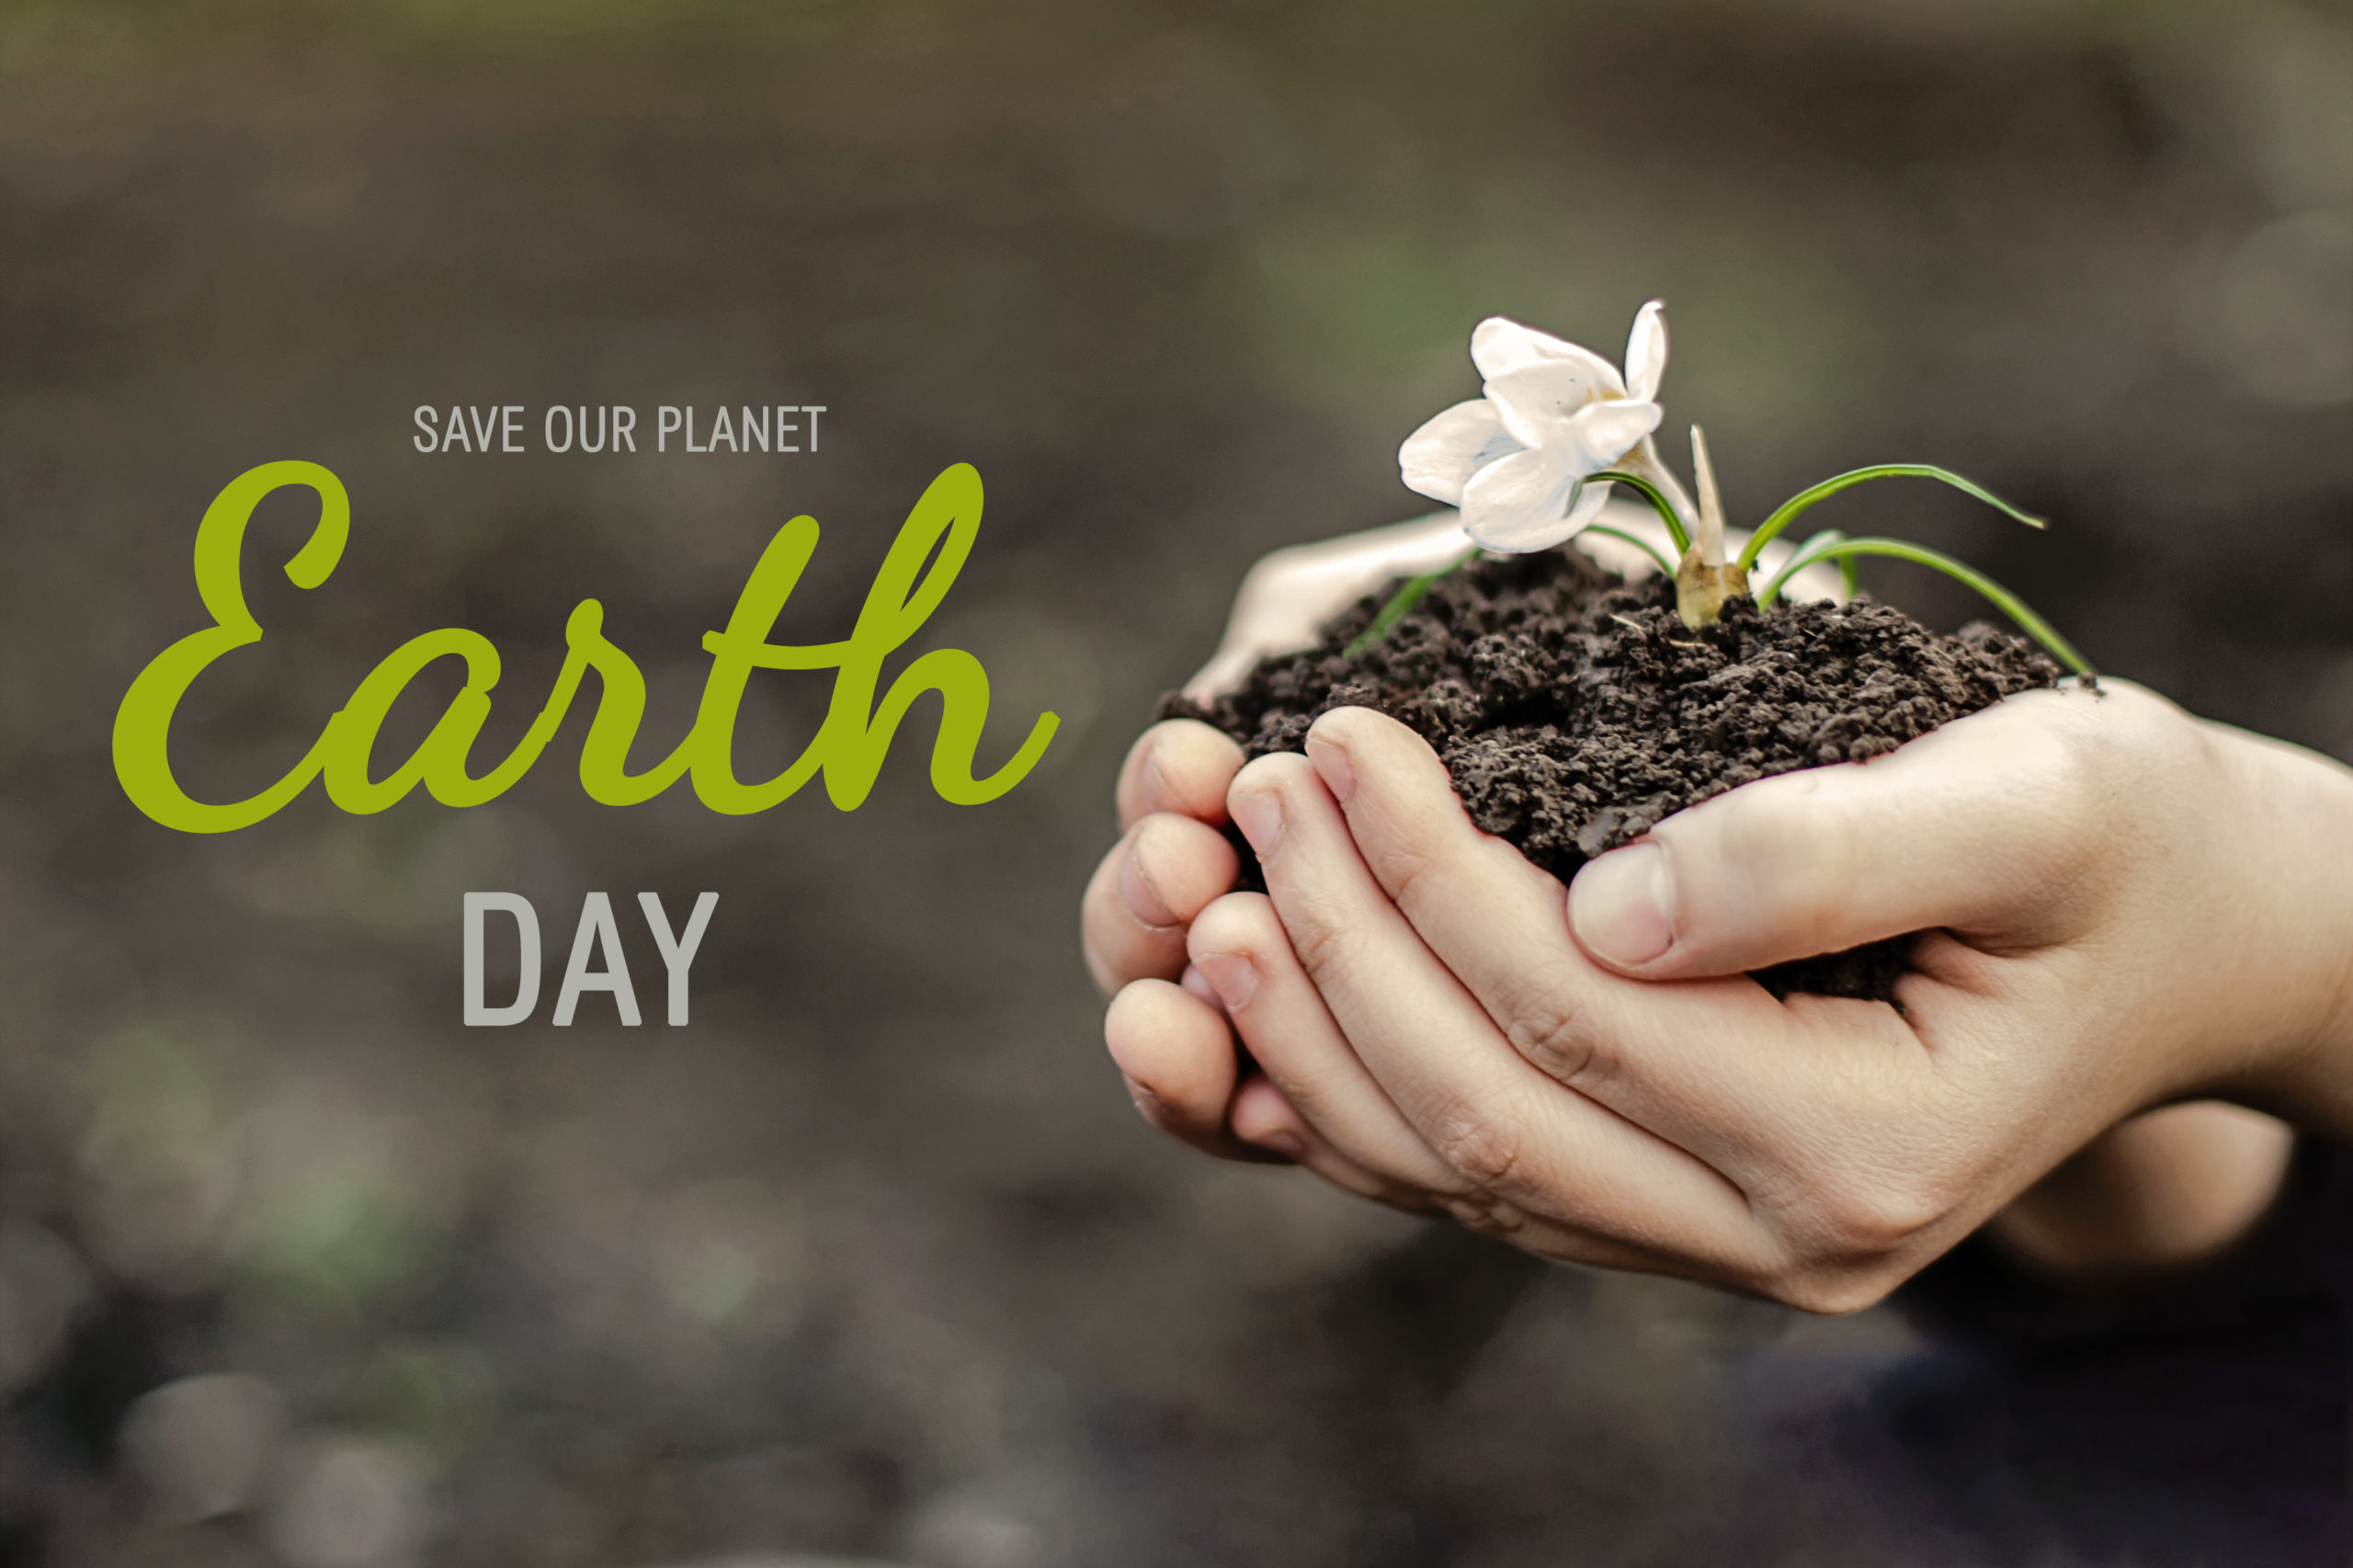 ext Save our planet. Earth day. child hands hold white flower growing from ground.